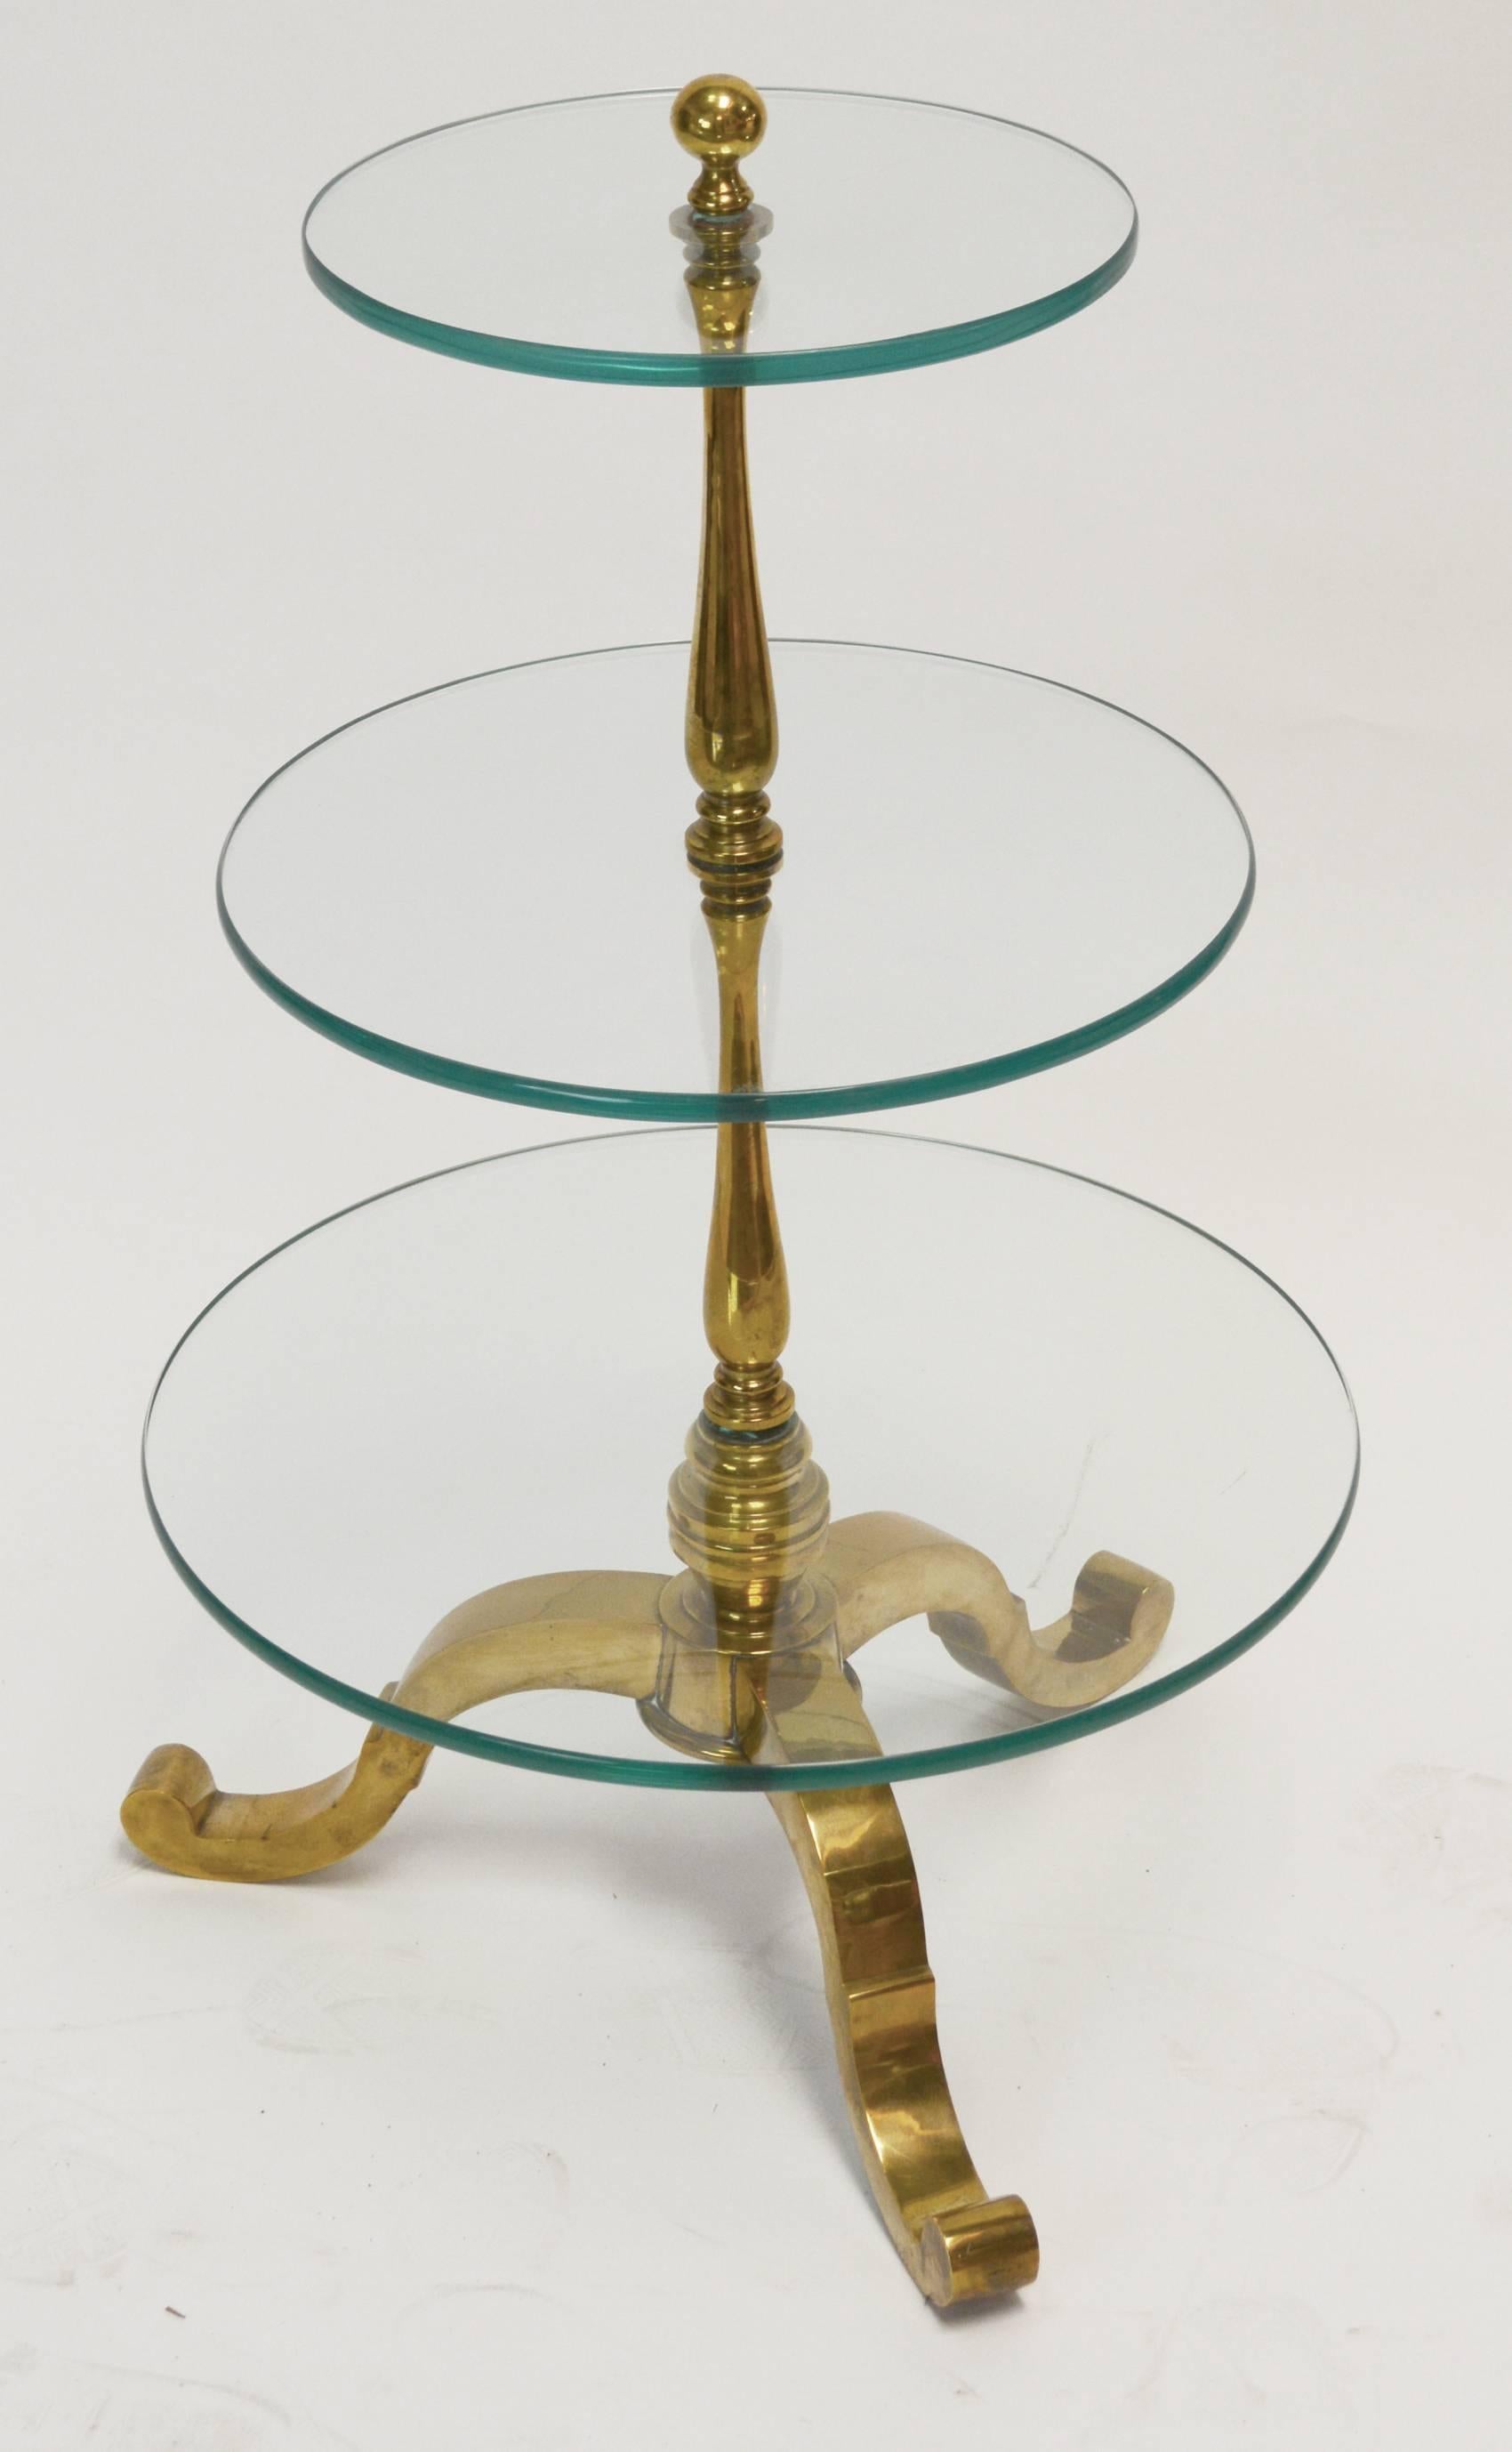 Dumbwaiter in the form of a Georgian three-tier dumbwaiter, with turned central column and tripod base in solid brass, with three thick glass shelves. A very elegant example of the form. Unmarked, but most likely Italian.